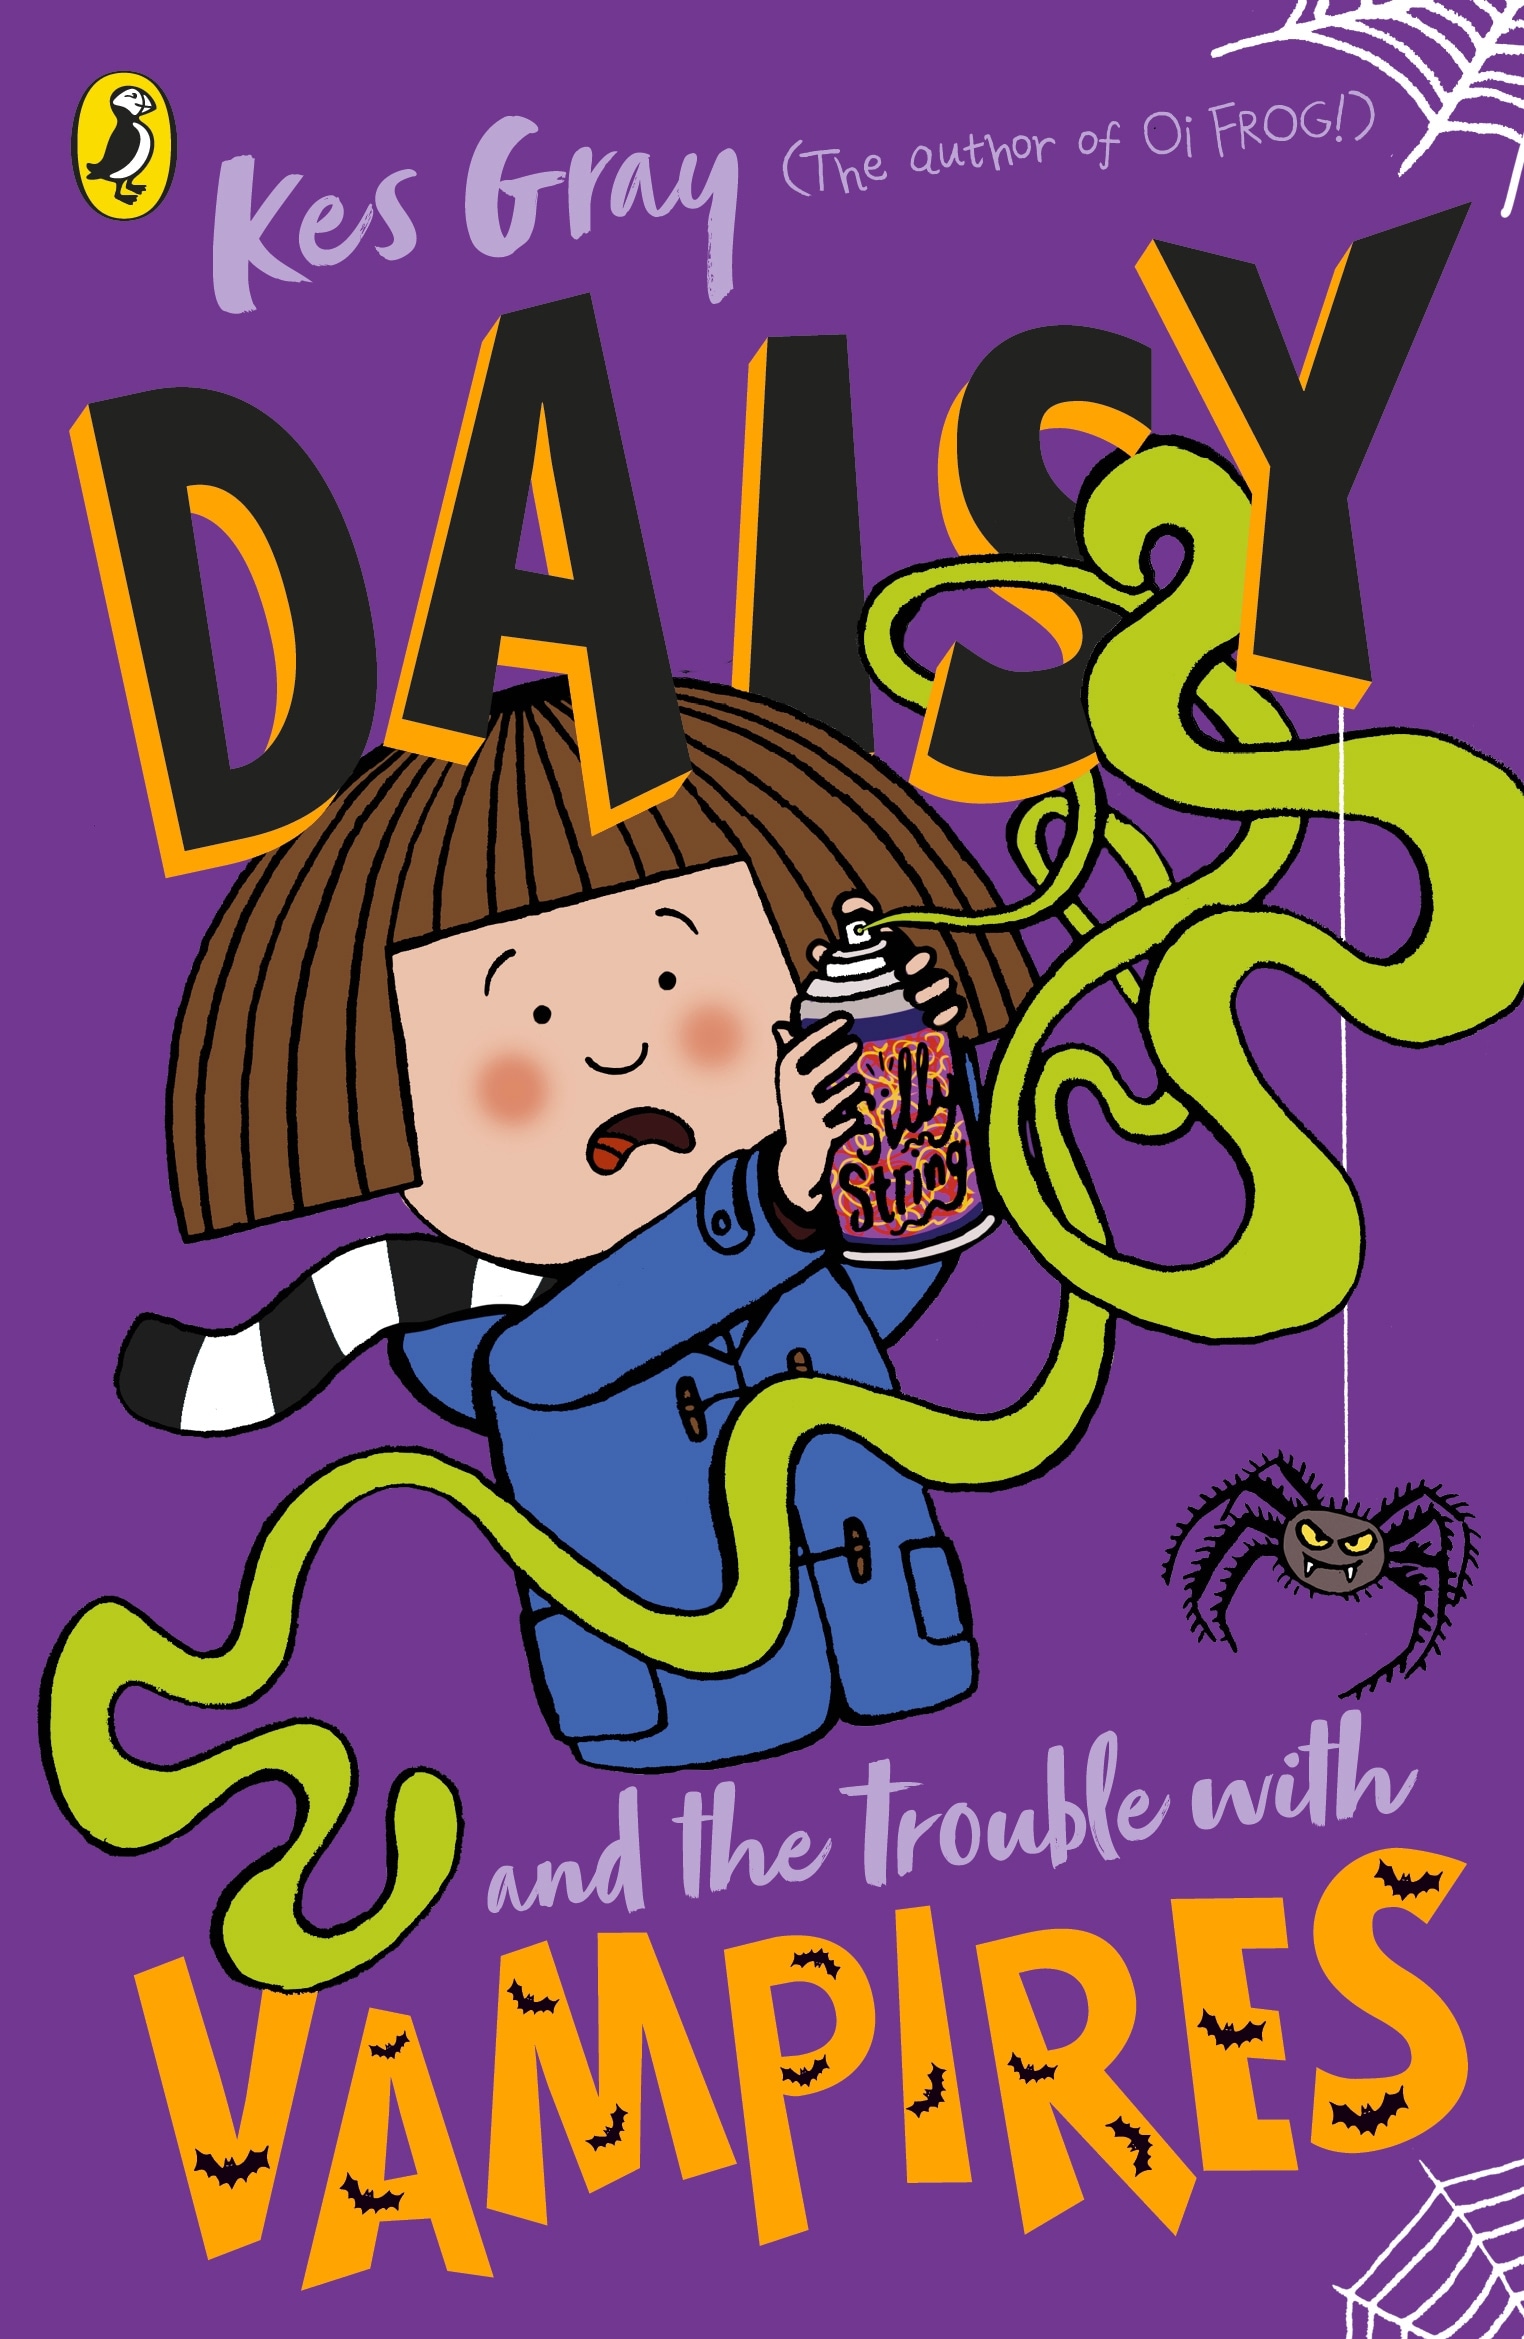 Book “Daisy and the Trouble with Vampires” by Kes Gray — September 3, 2020